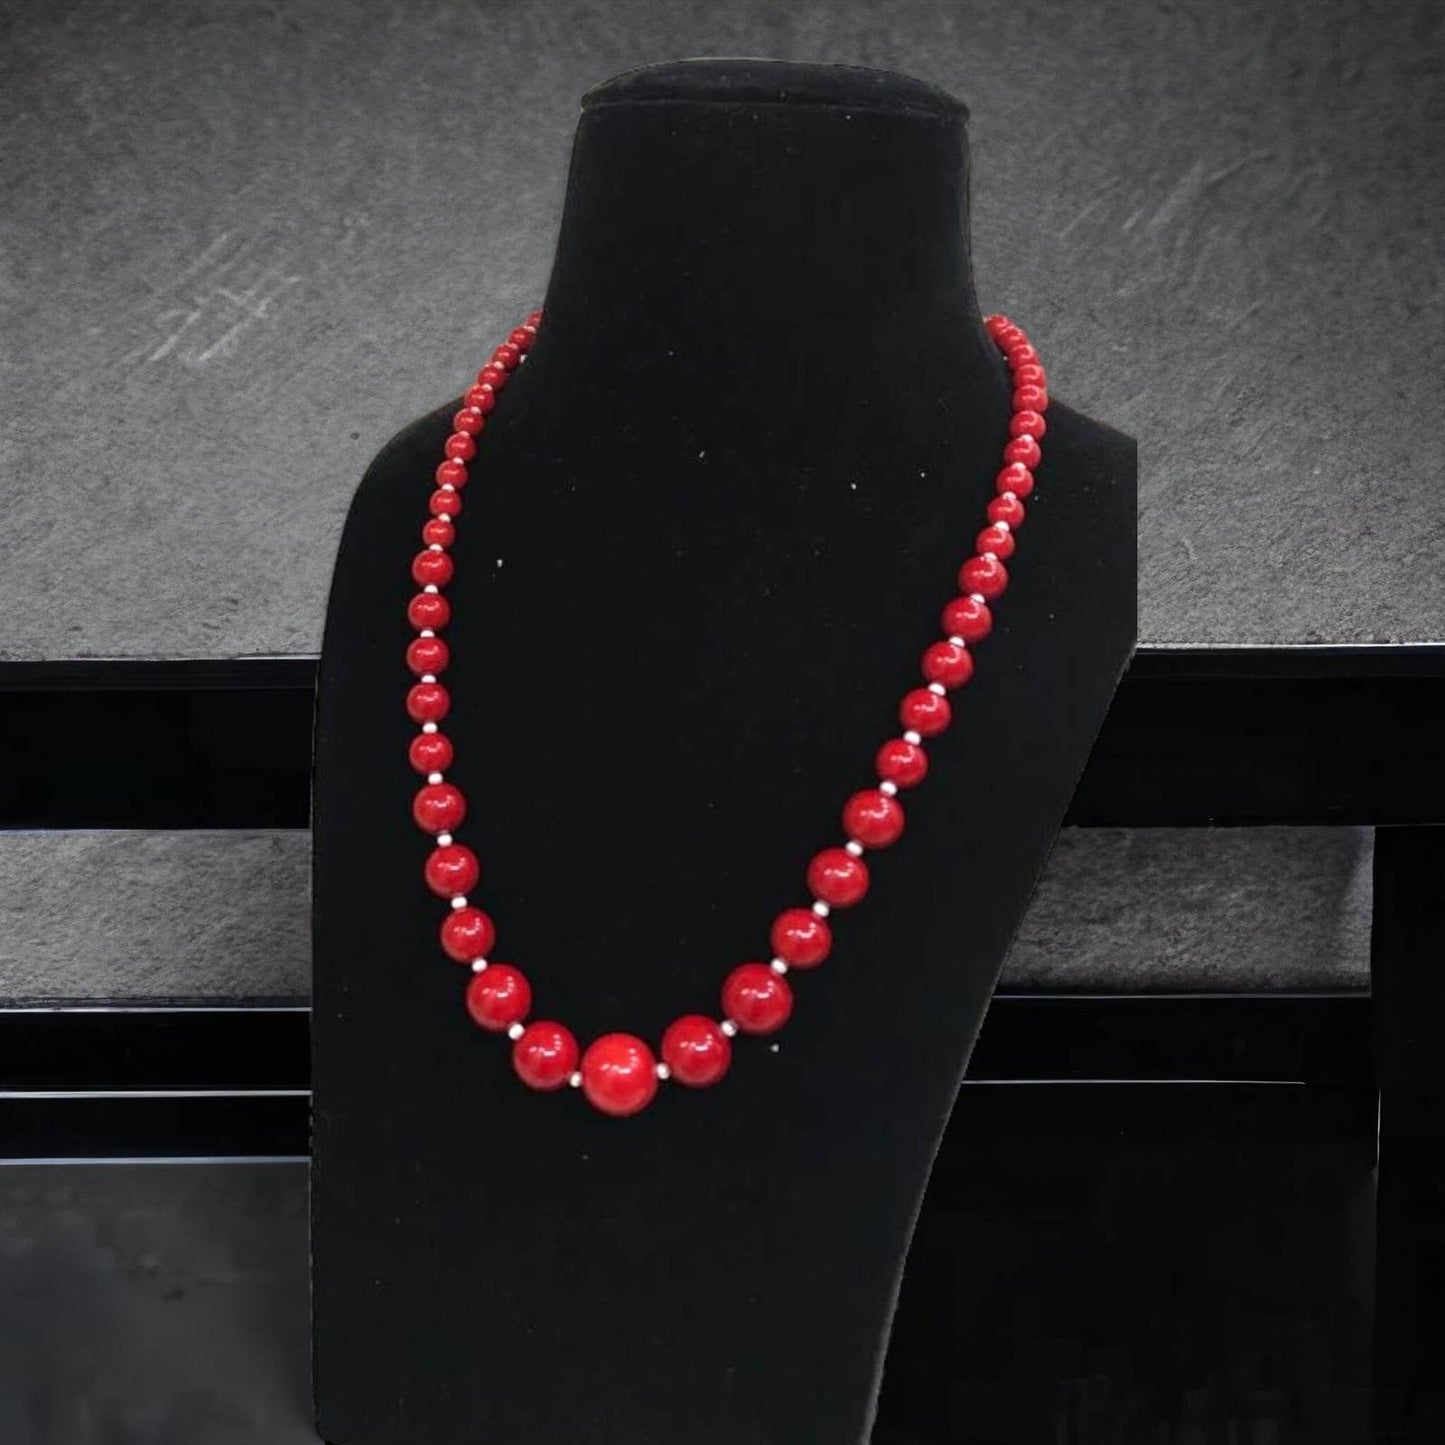 Aisha pearl necklace in red color